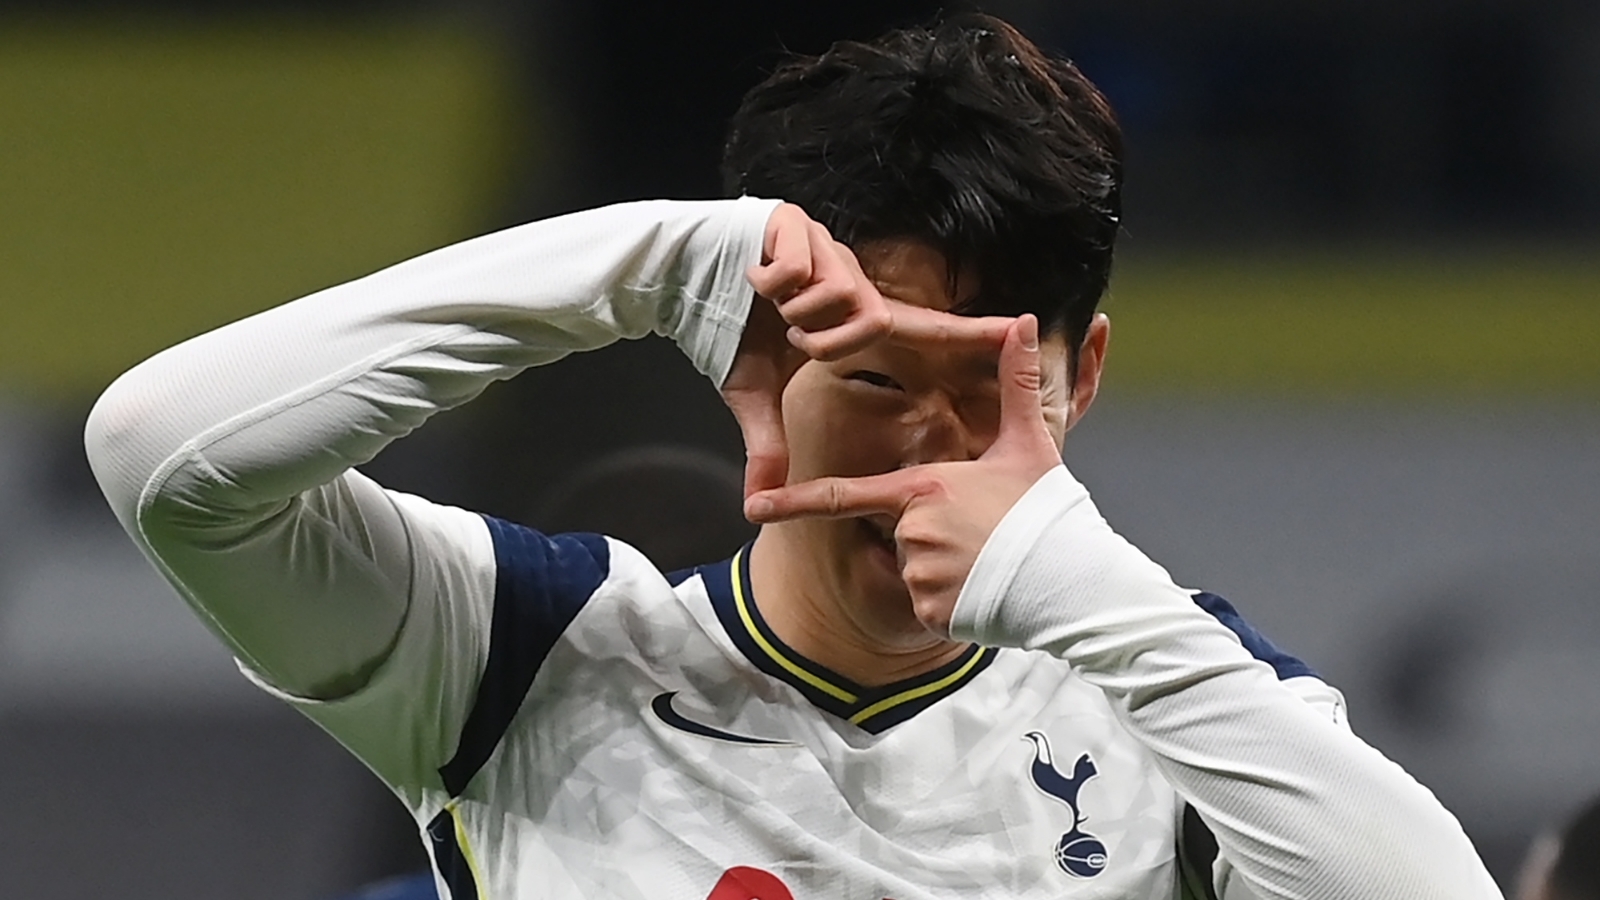 Son Heung-min celebration: What is the meaning behind Tottenham star's camera gesture? | Goal.com